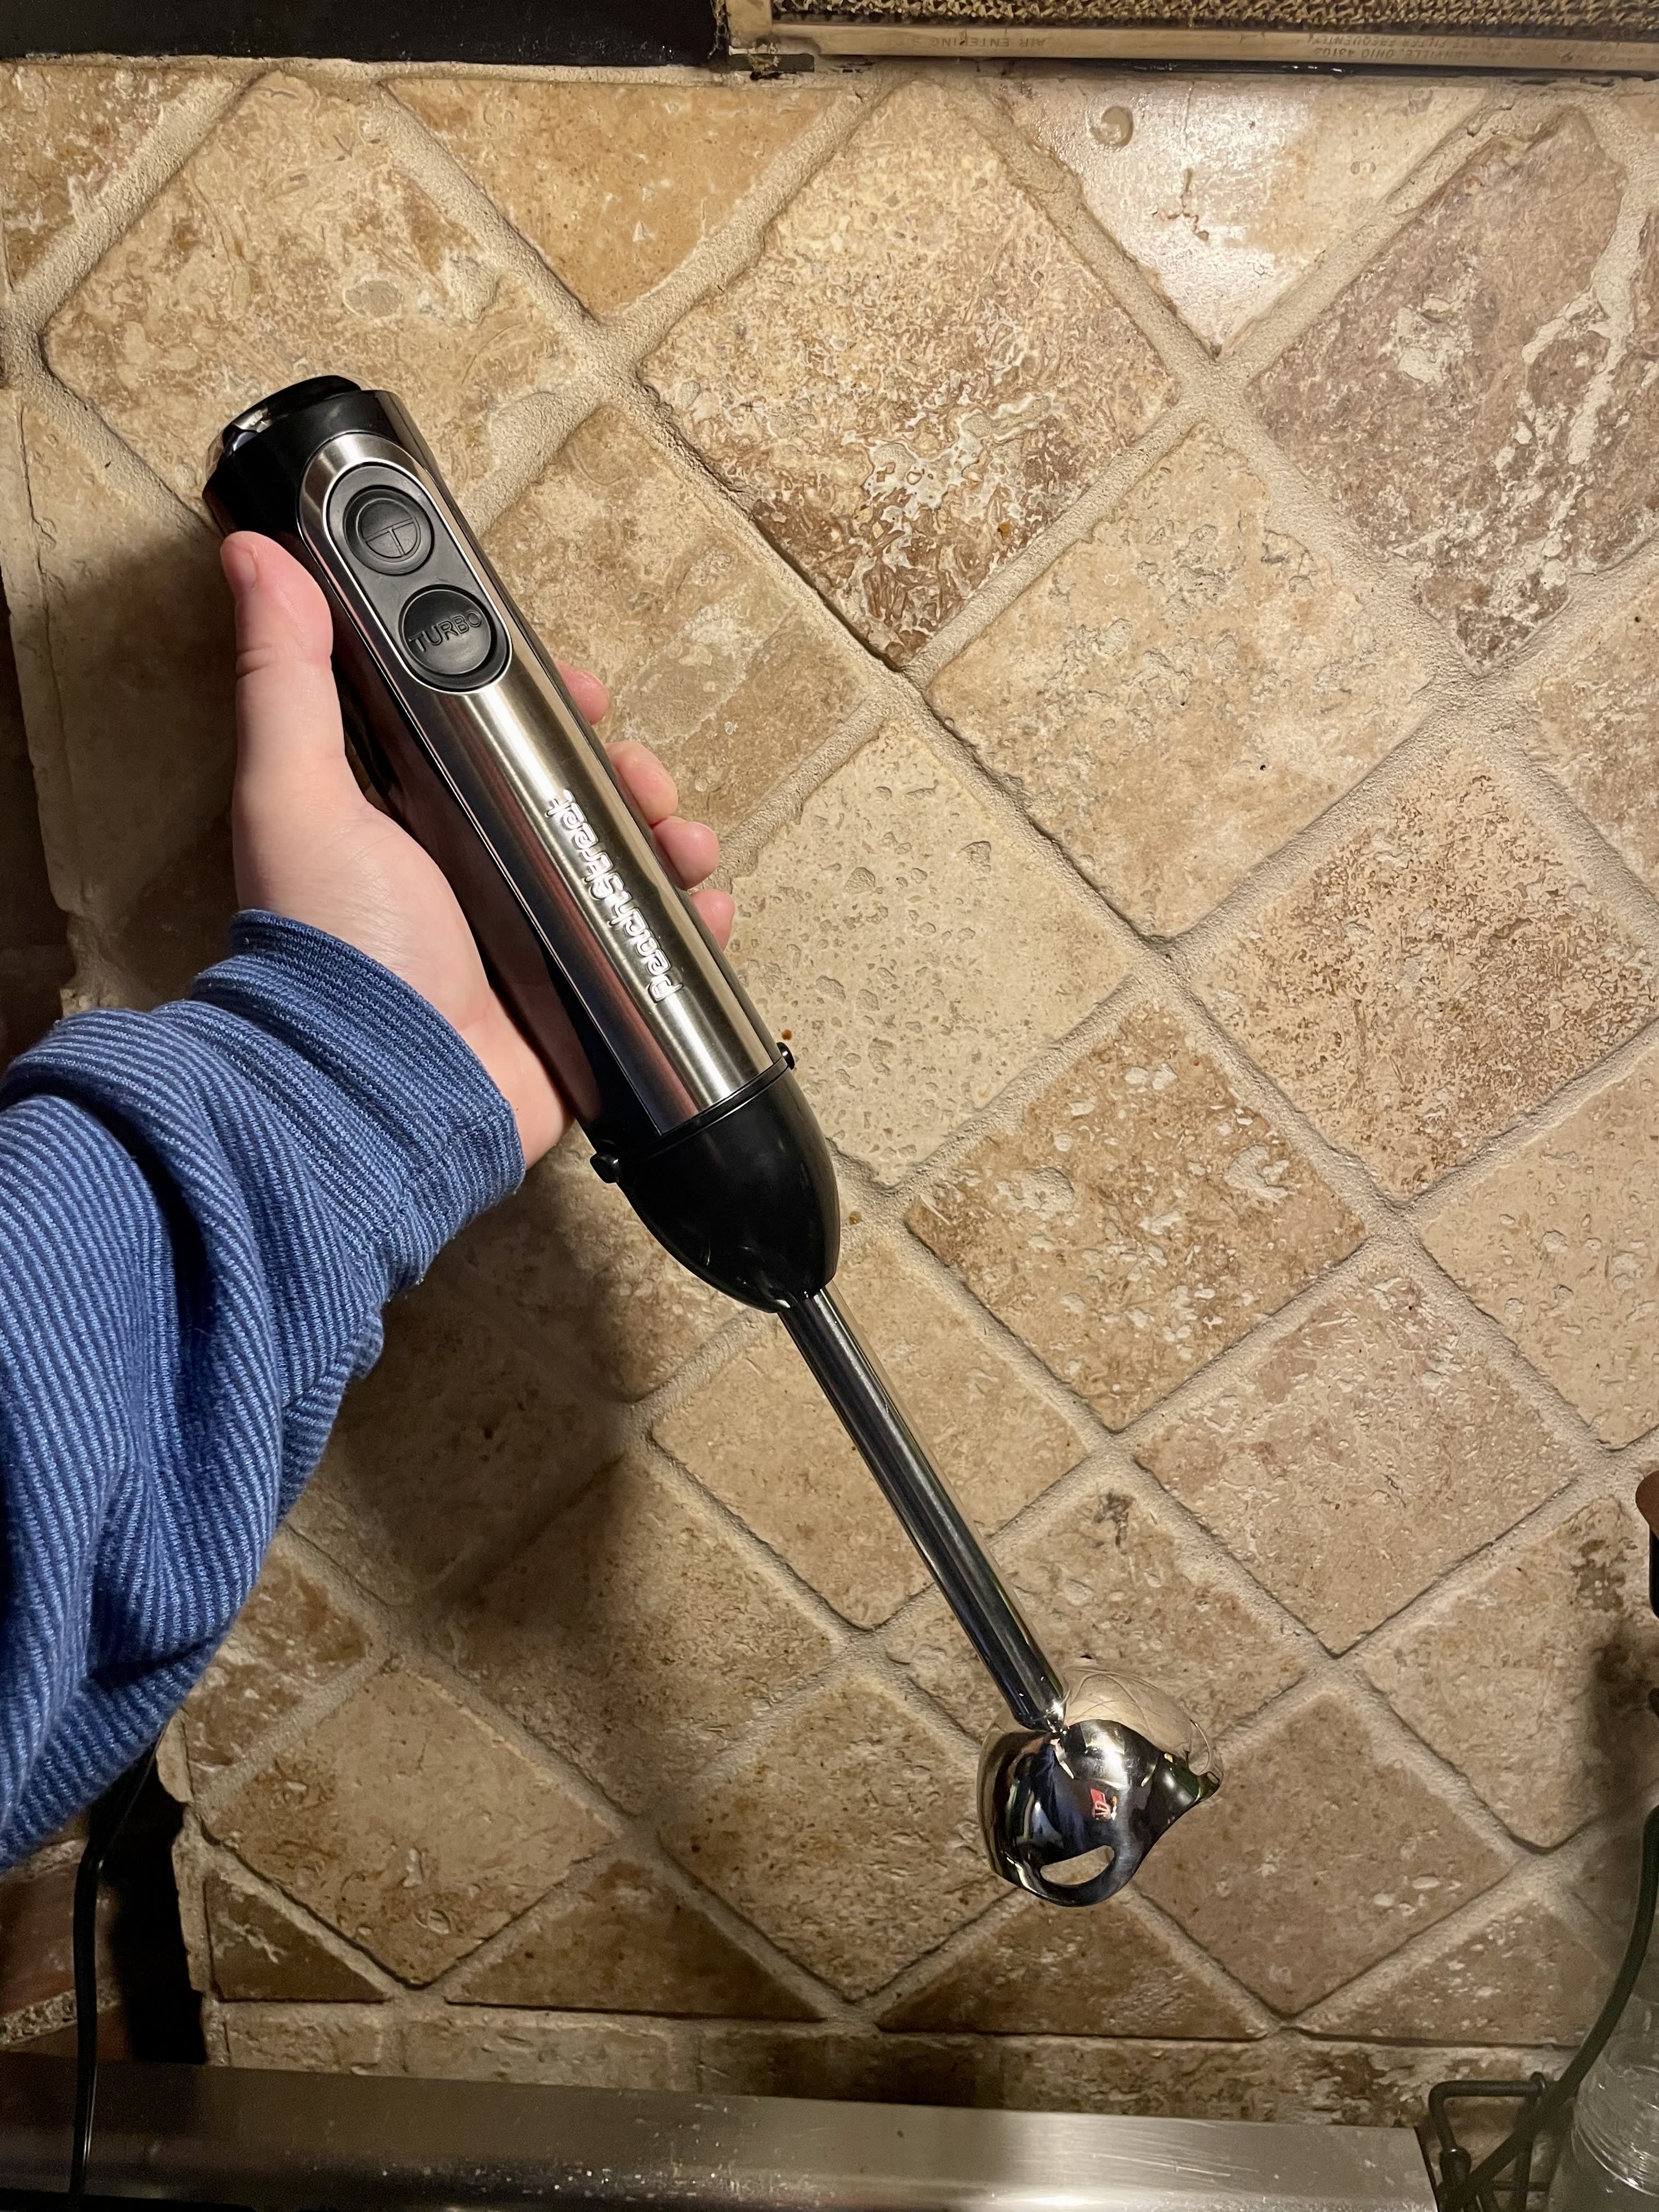 Peach Tree Immersion Blender Review 2022: My Go-To Tool for Soup Season